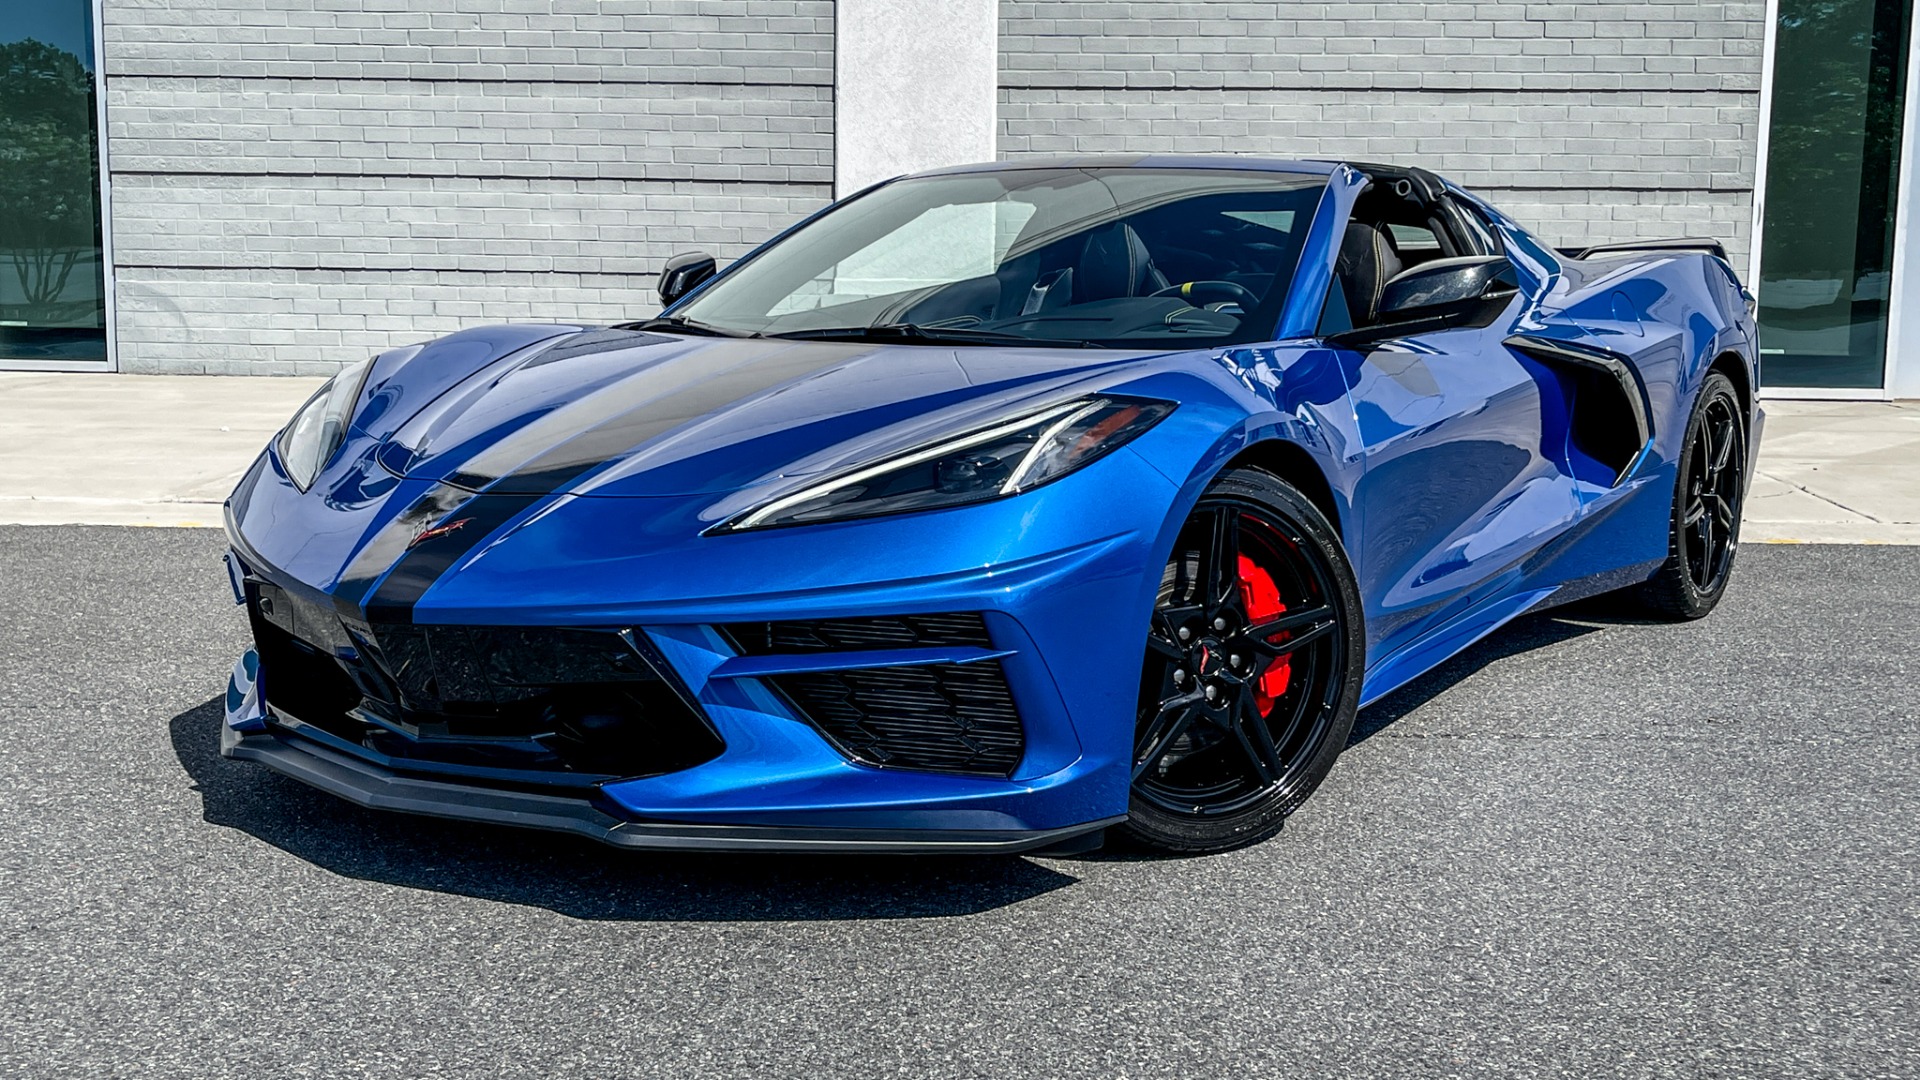 Used 2021 Chevrolet CORVETTE STINGRAY 3LT COUPE / 8-SPD / PERF PKG / NAV / BOSE / REARVIEW for sale Sold at Formula Imports in Charlotte NC 28227 1